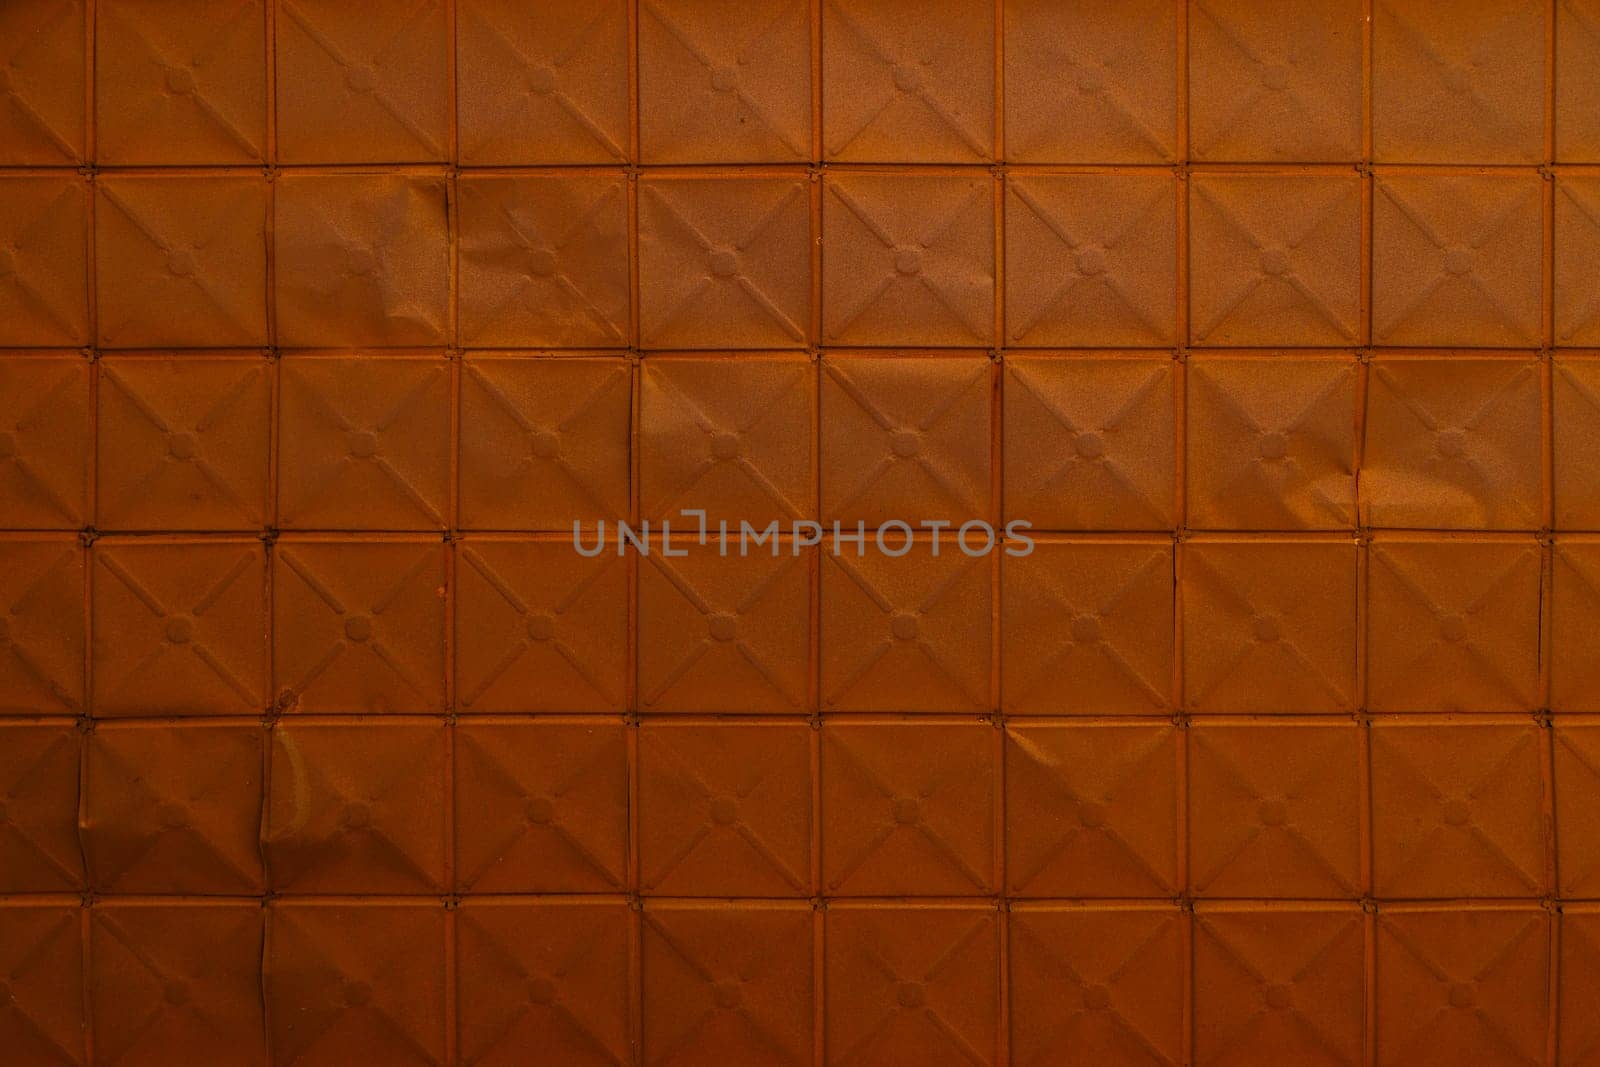 full-frame background and texture of square stamped sheet metal tiles with diagonal ribs.